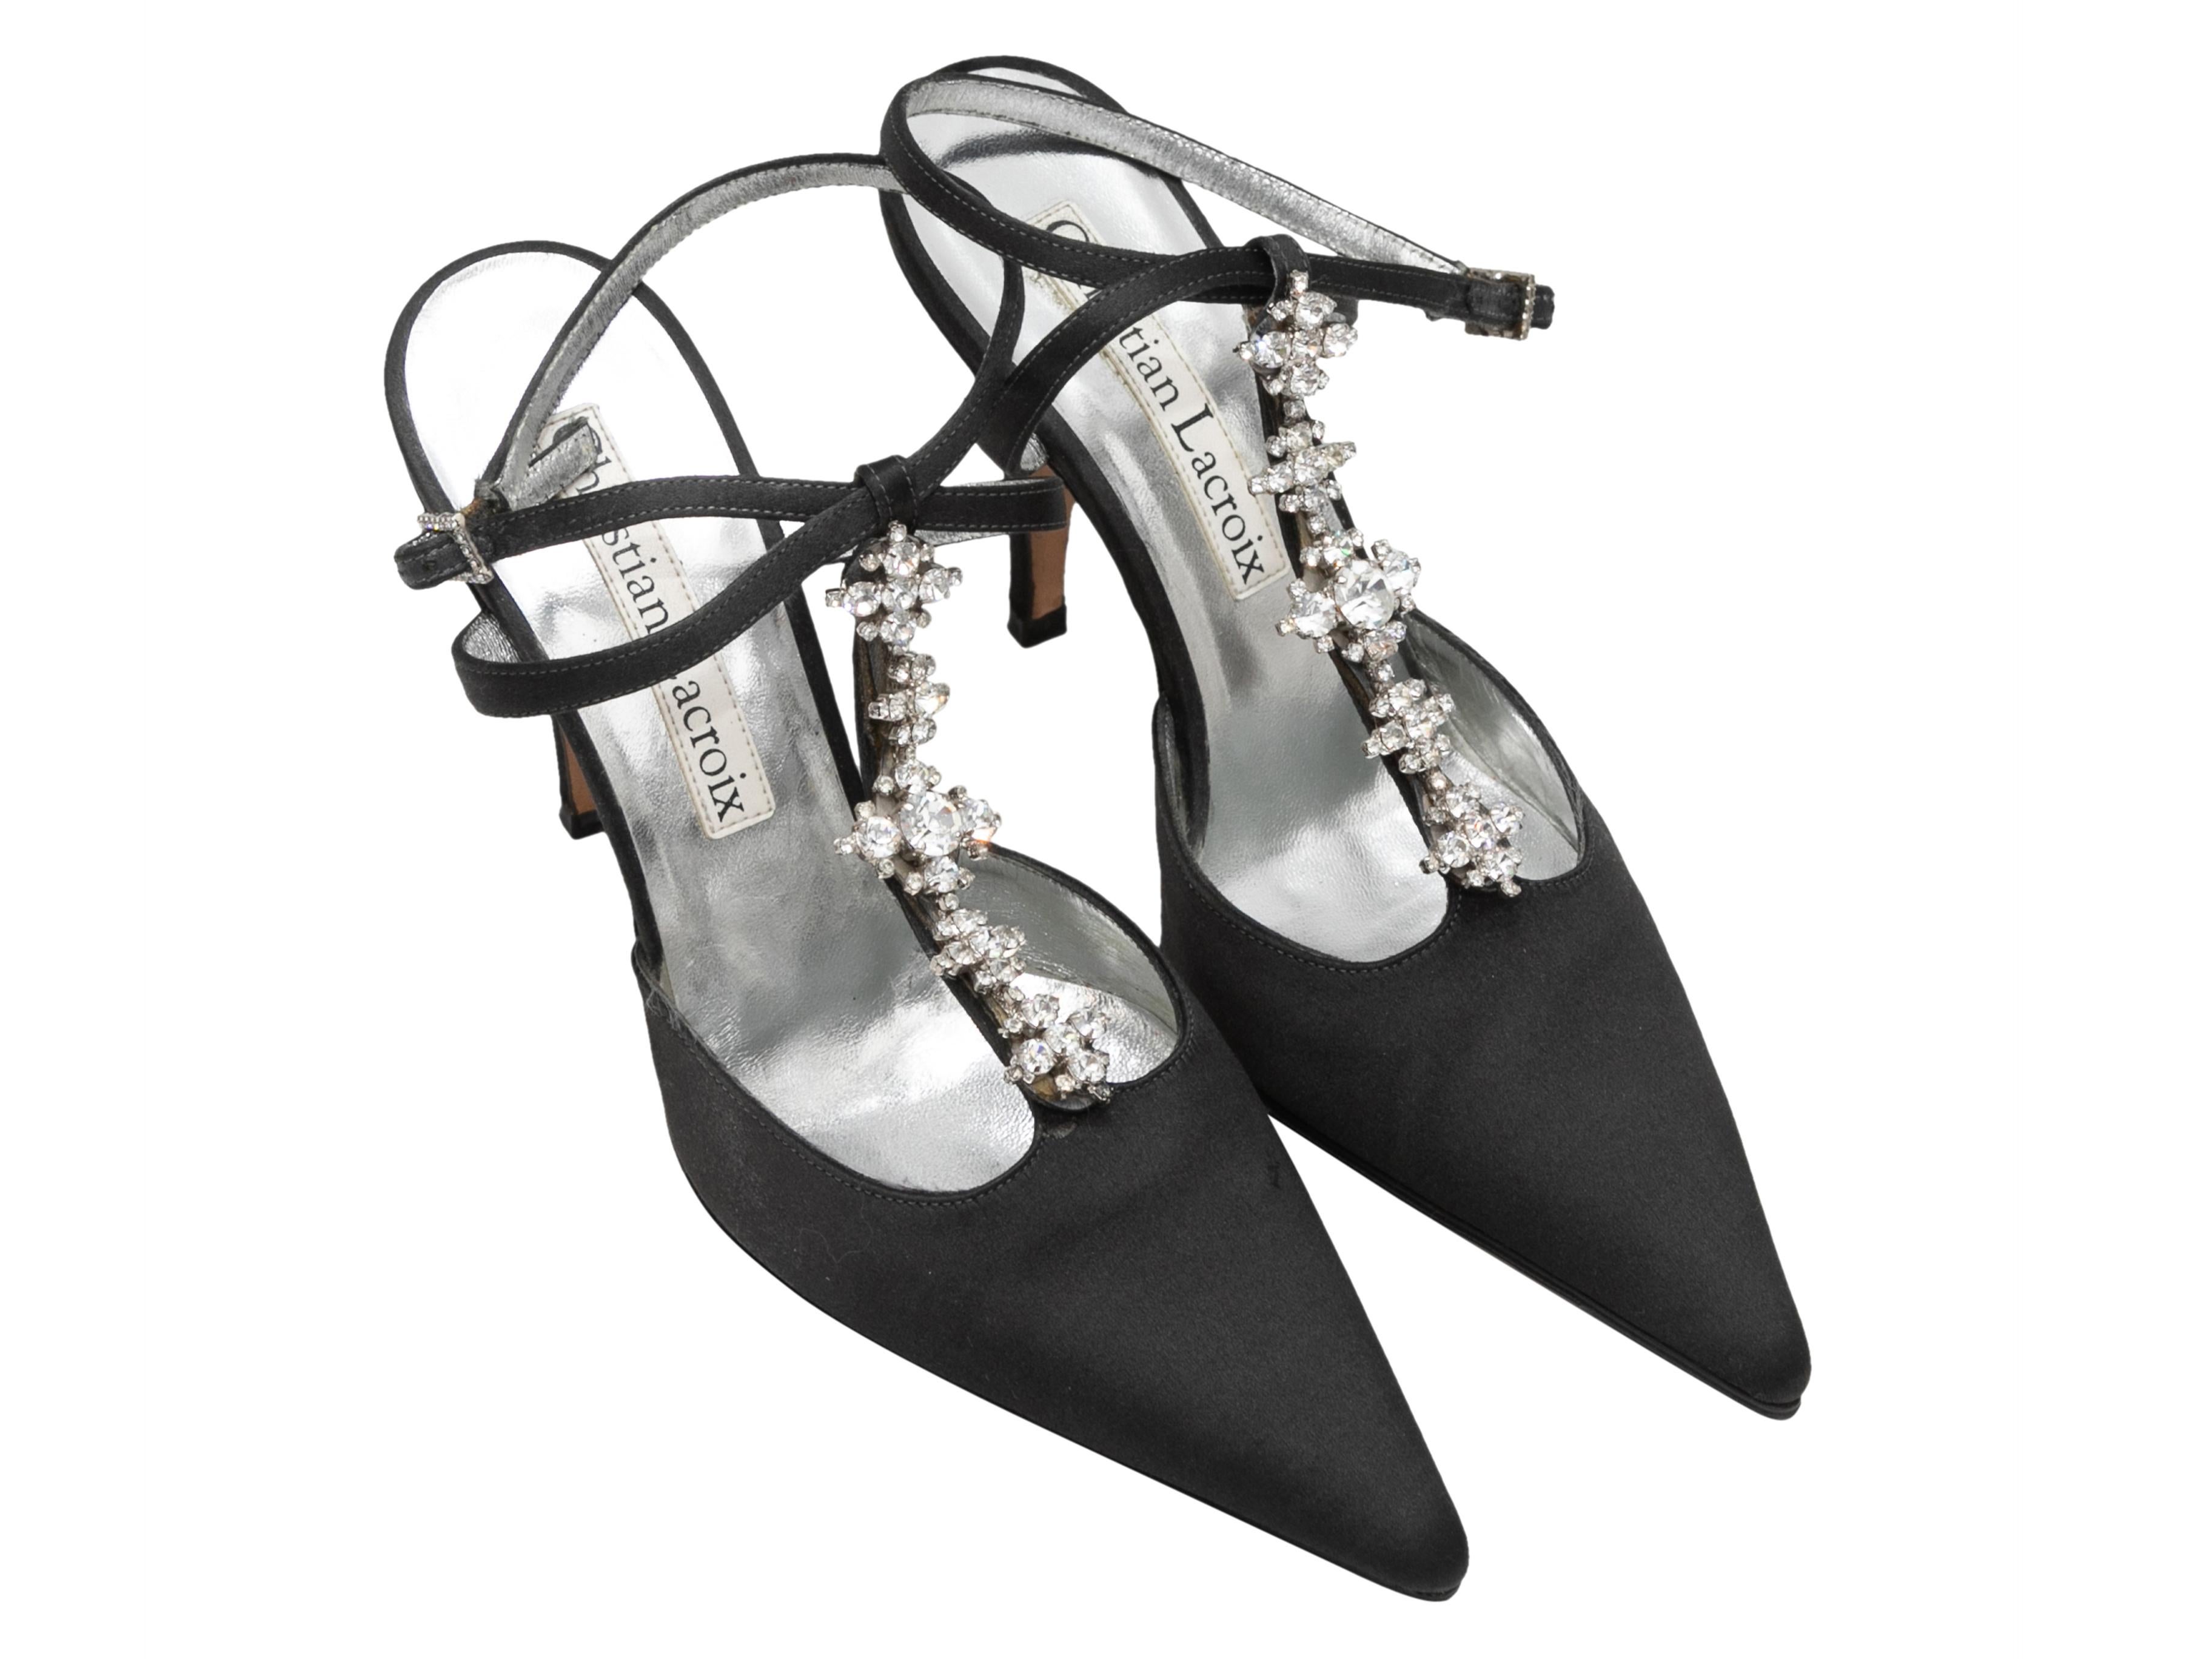 Vintage black silk pointed-toe crystal-embellished heels by Christian Lacroix. Buckle closures at ankle straps. 4.75